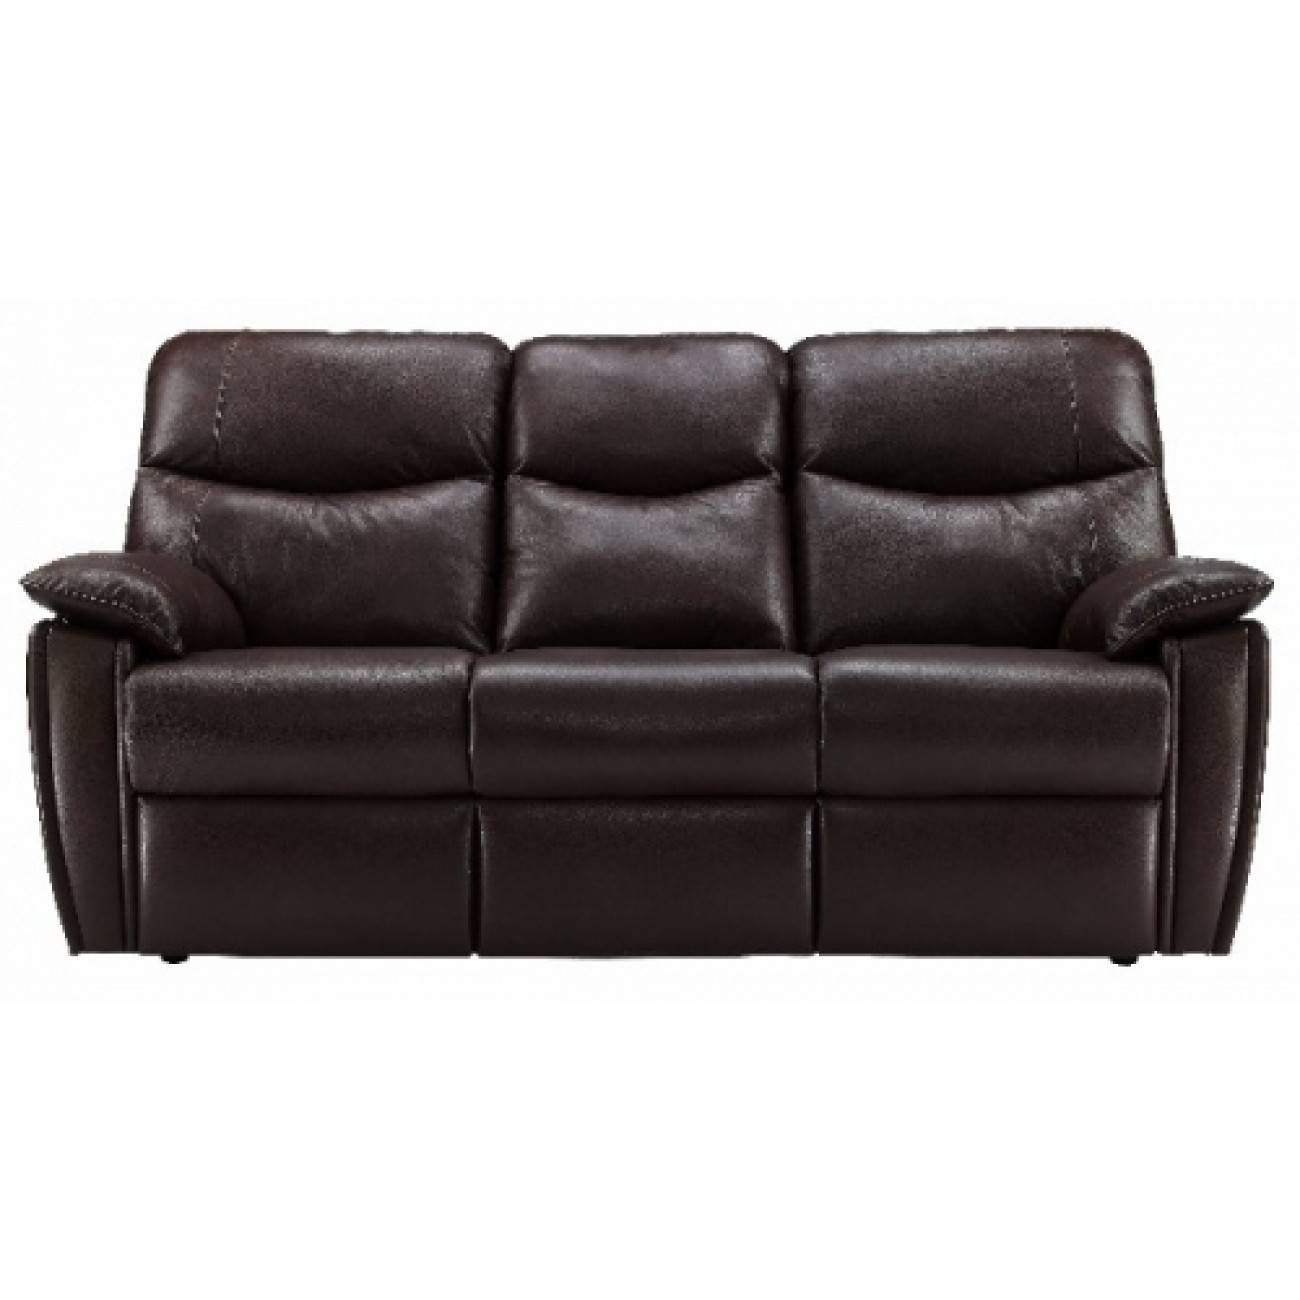 Sealy Leather Sofa: Beautiful Pictures, Photos Of Remodeling With Sealy Leather Sofas (View 1 of 15)